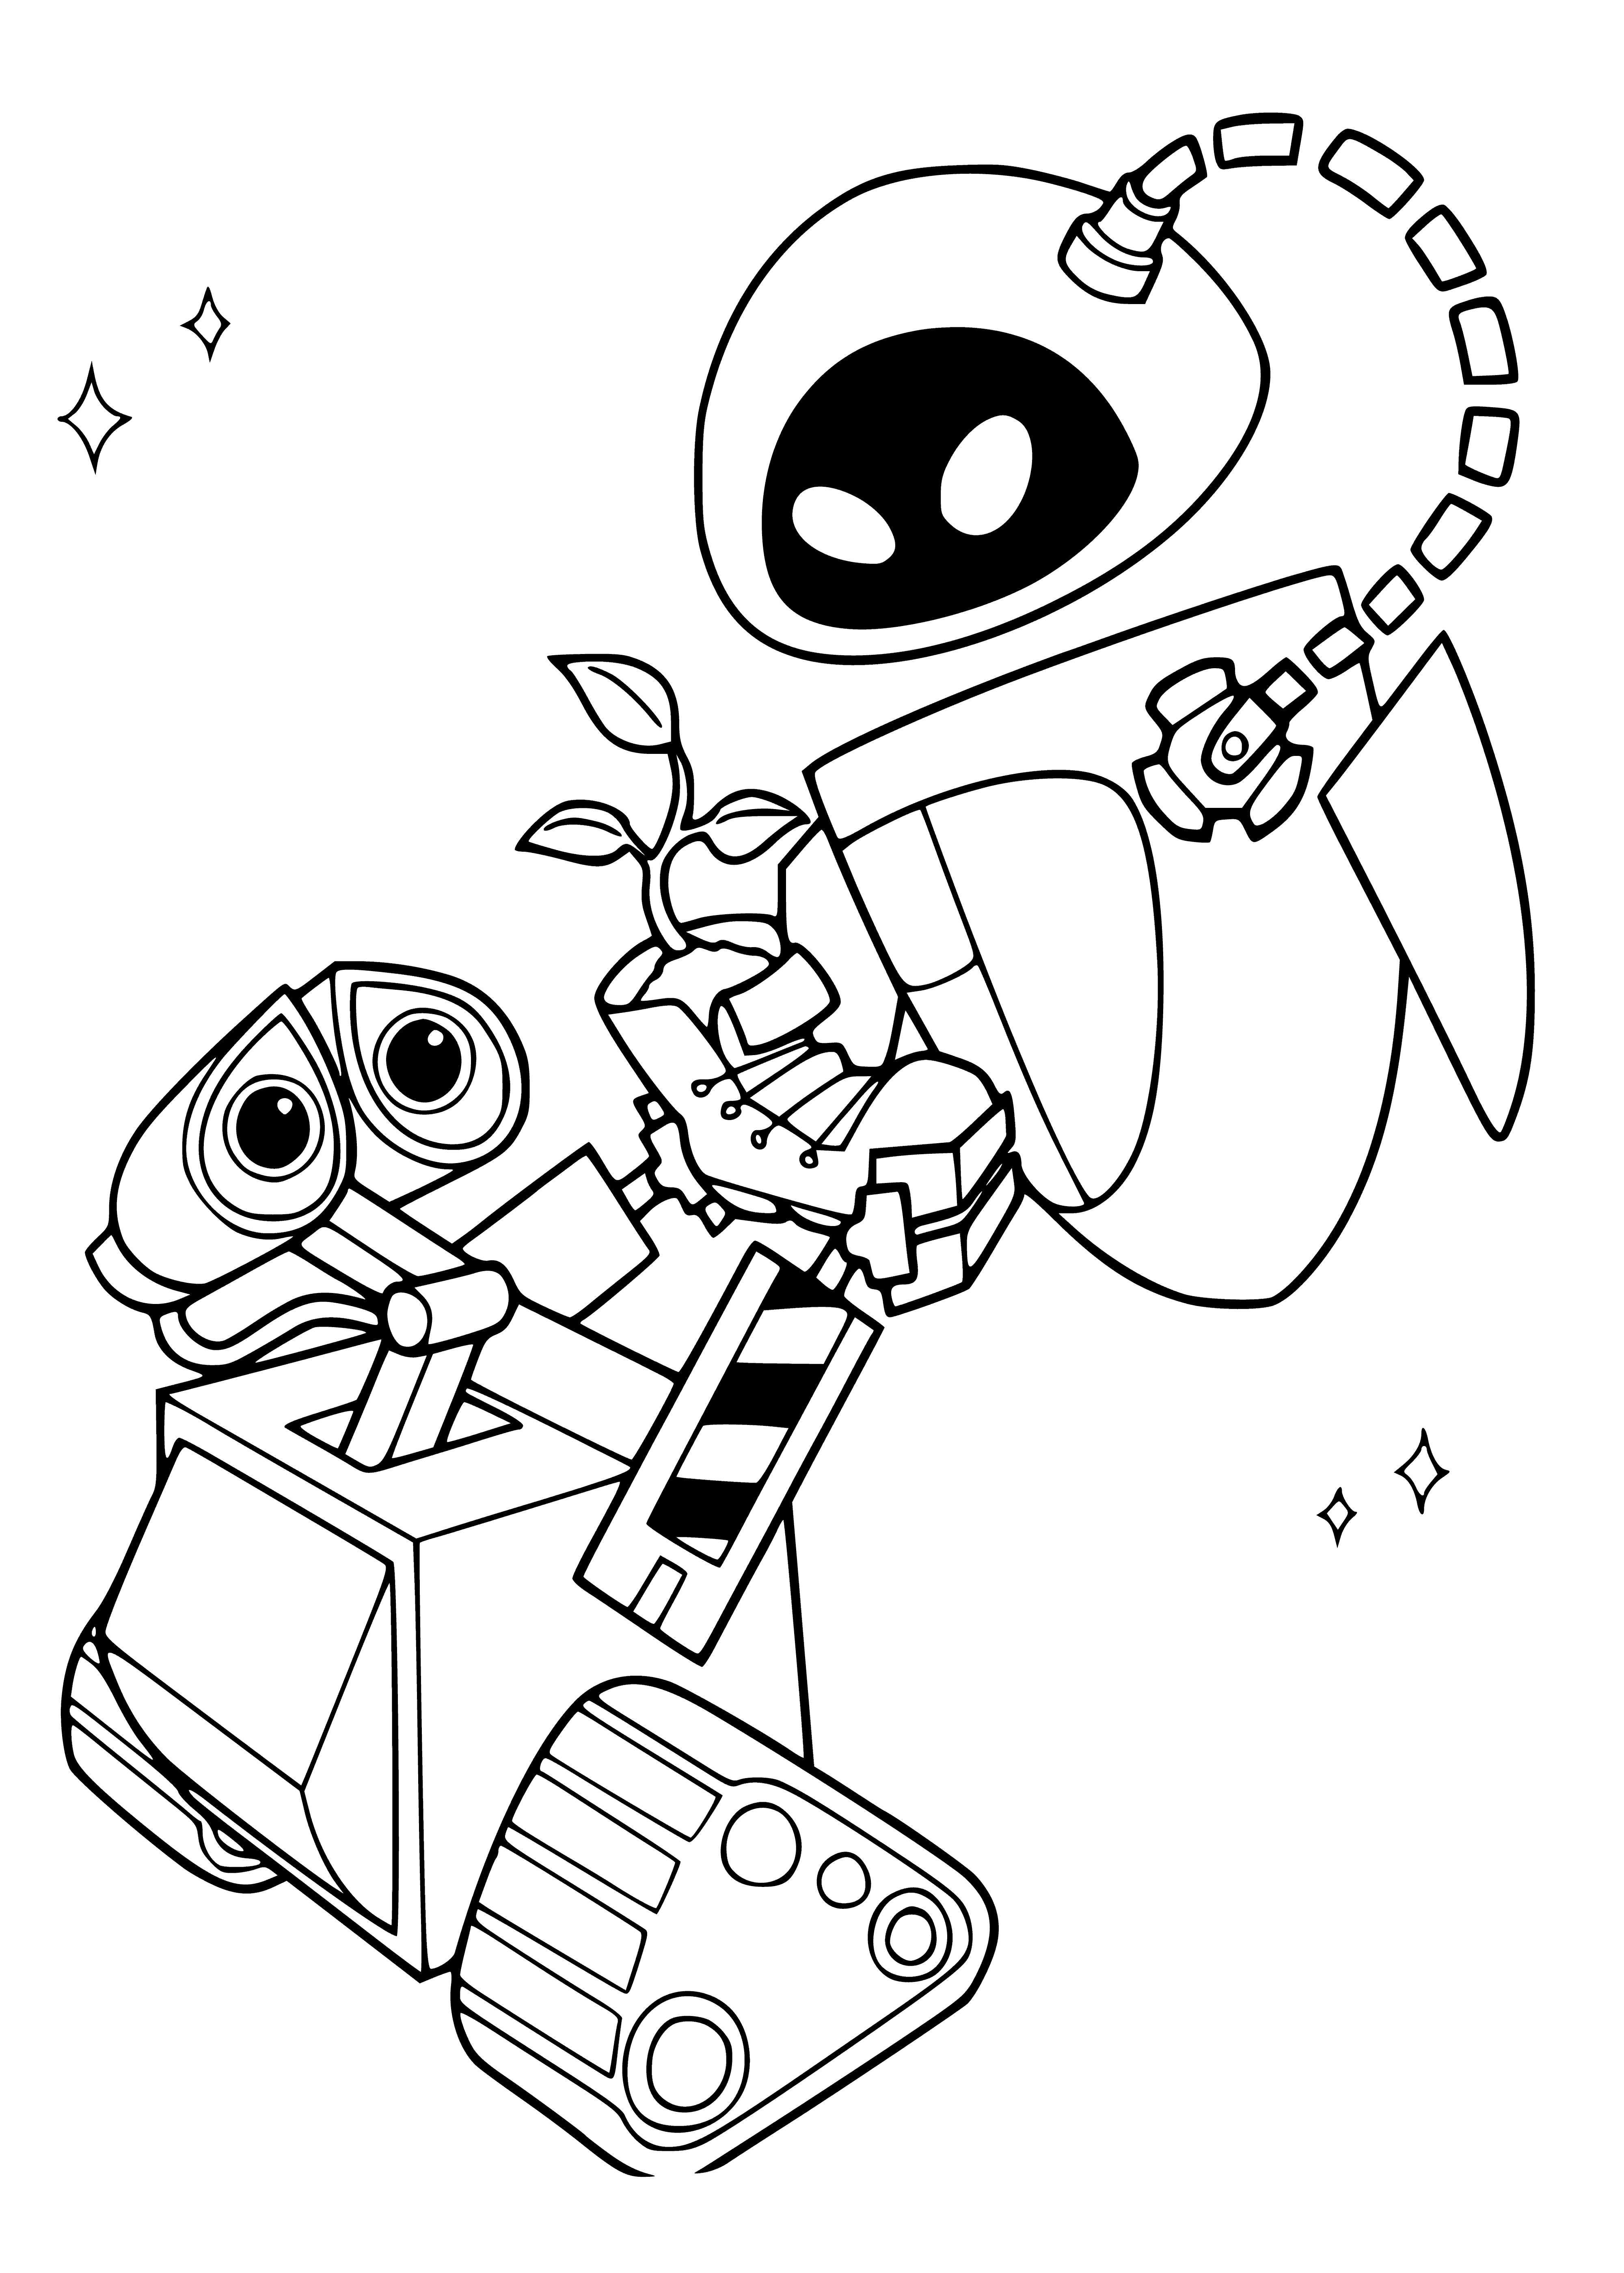 Valley, Sprout and Eve coloring page